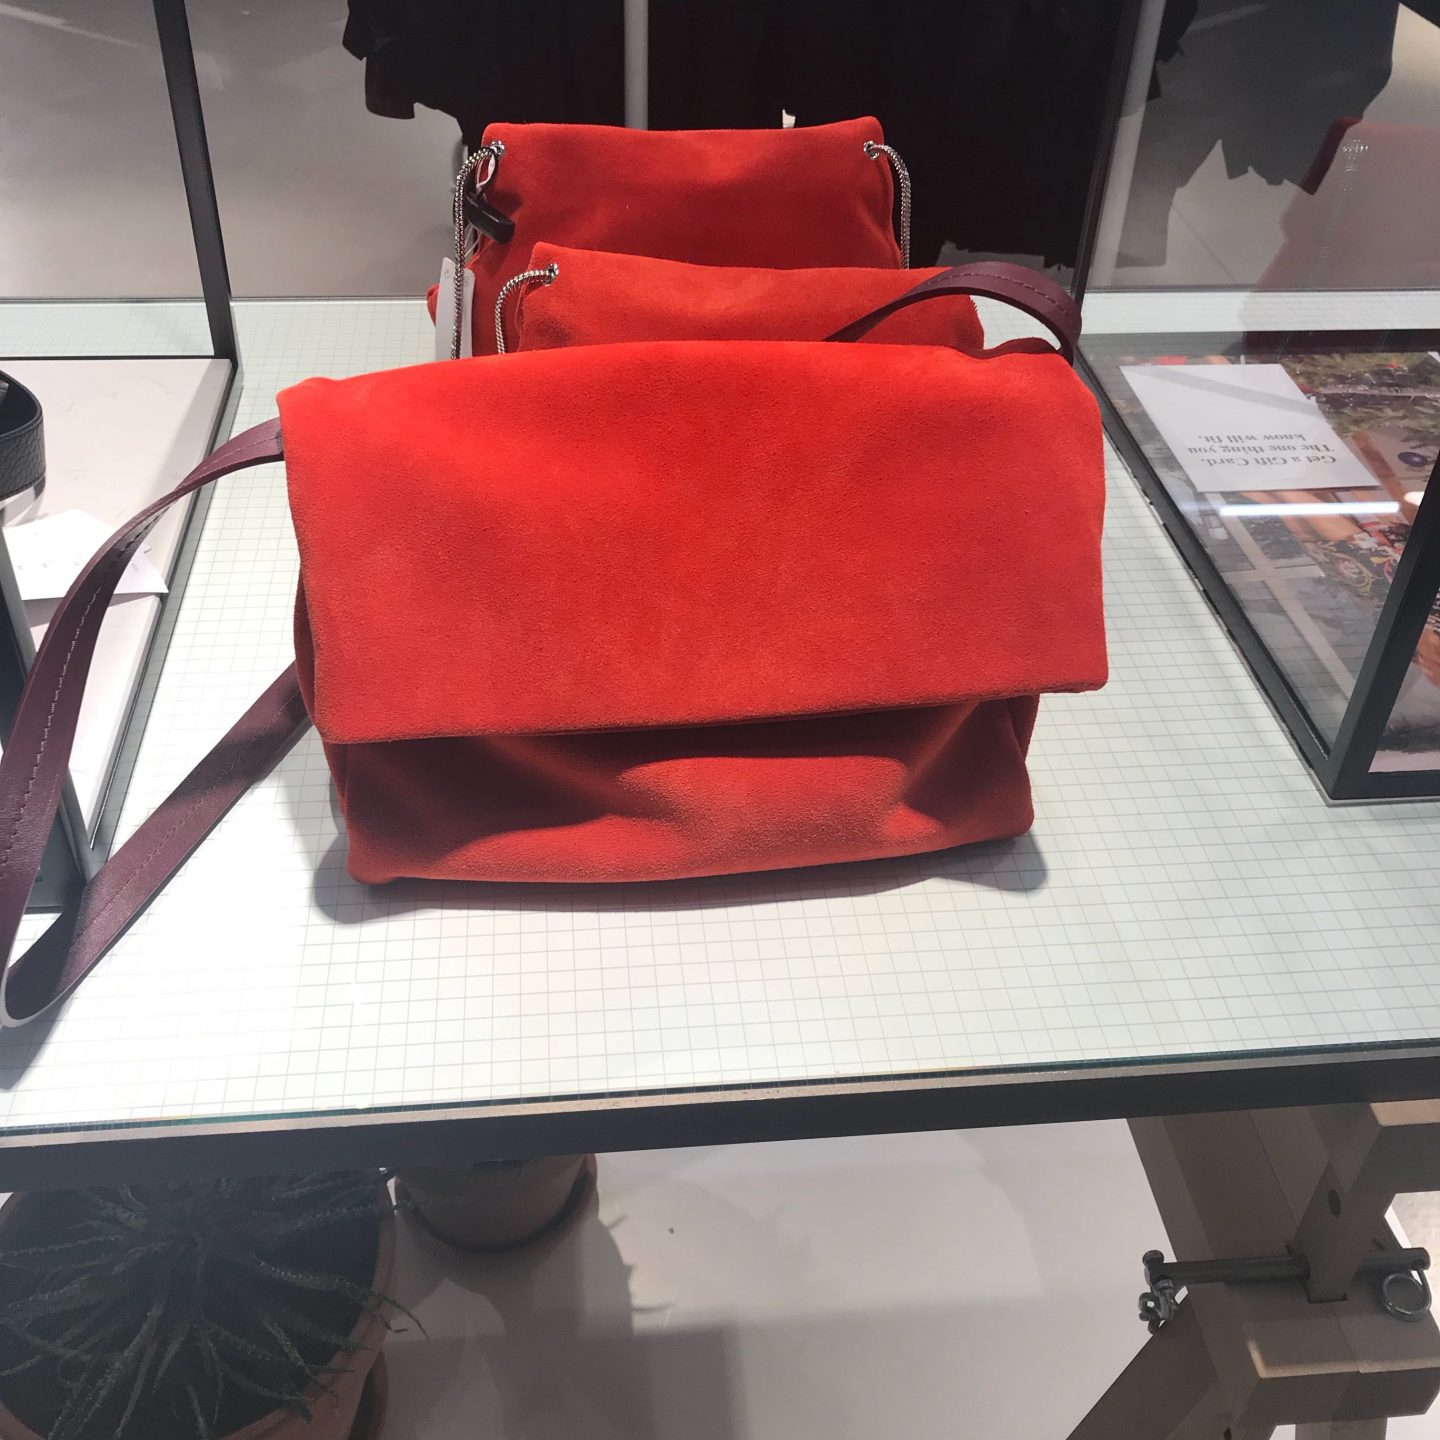 Red suede bag and other stories 1440x1440 - This seasons red fashion trend is my new obsession